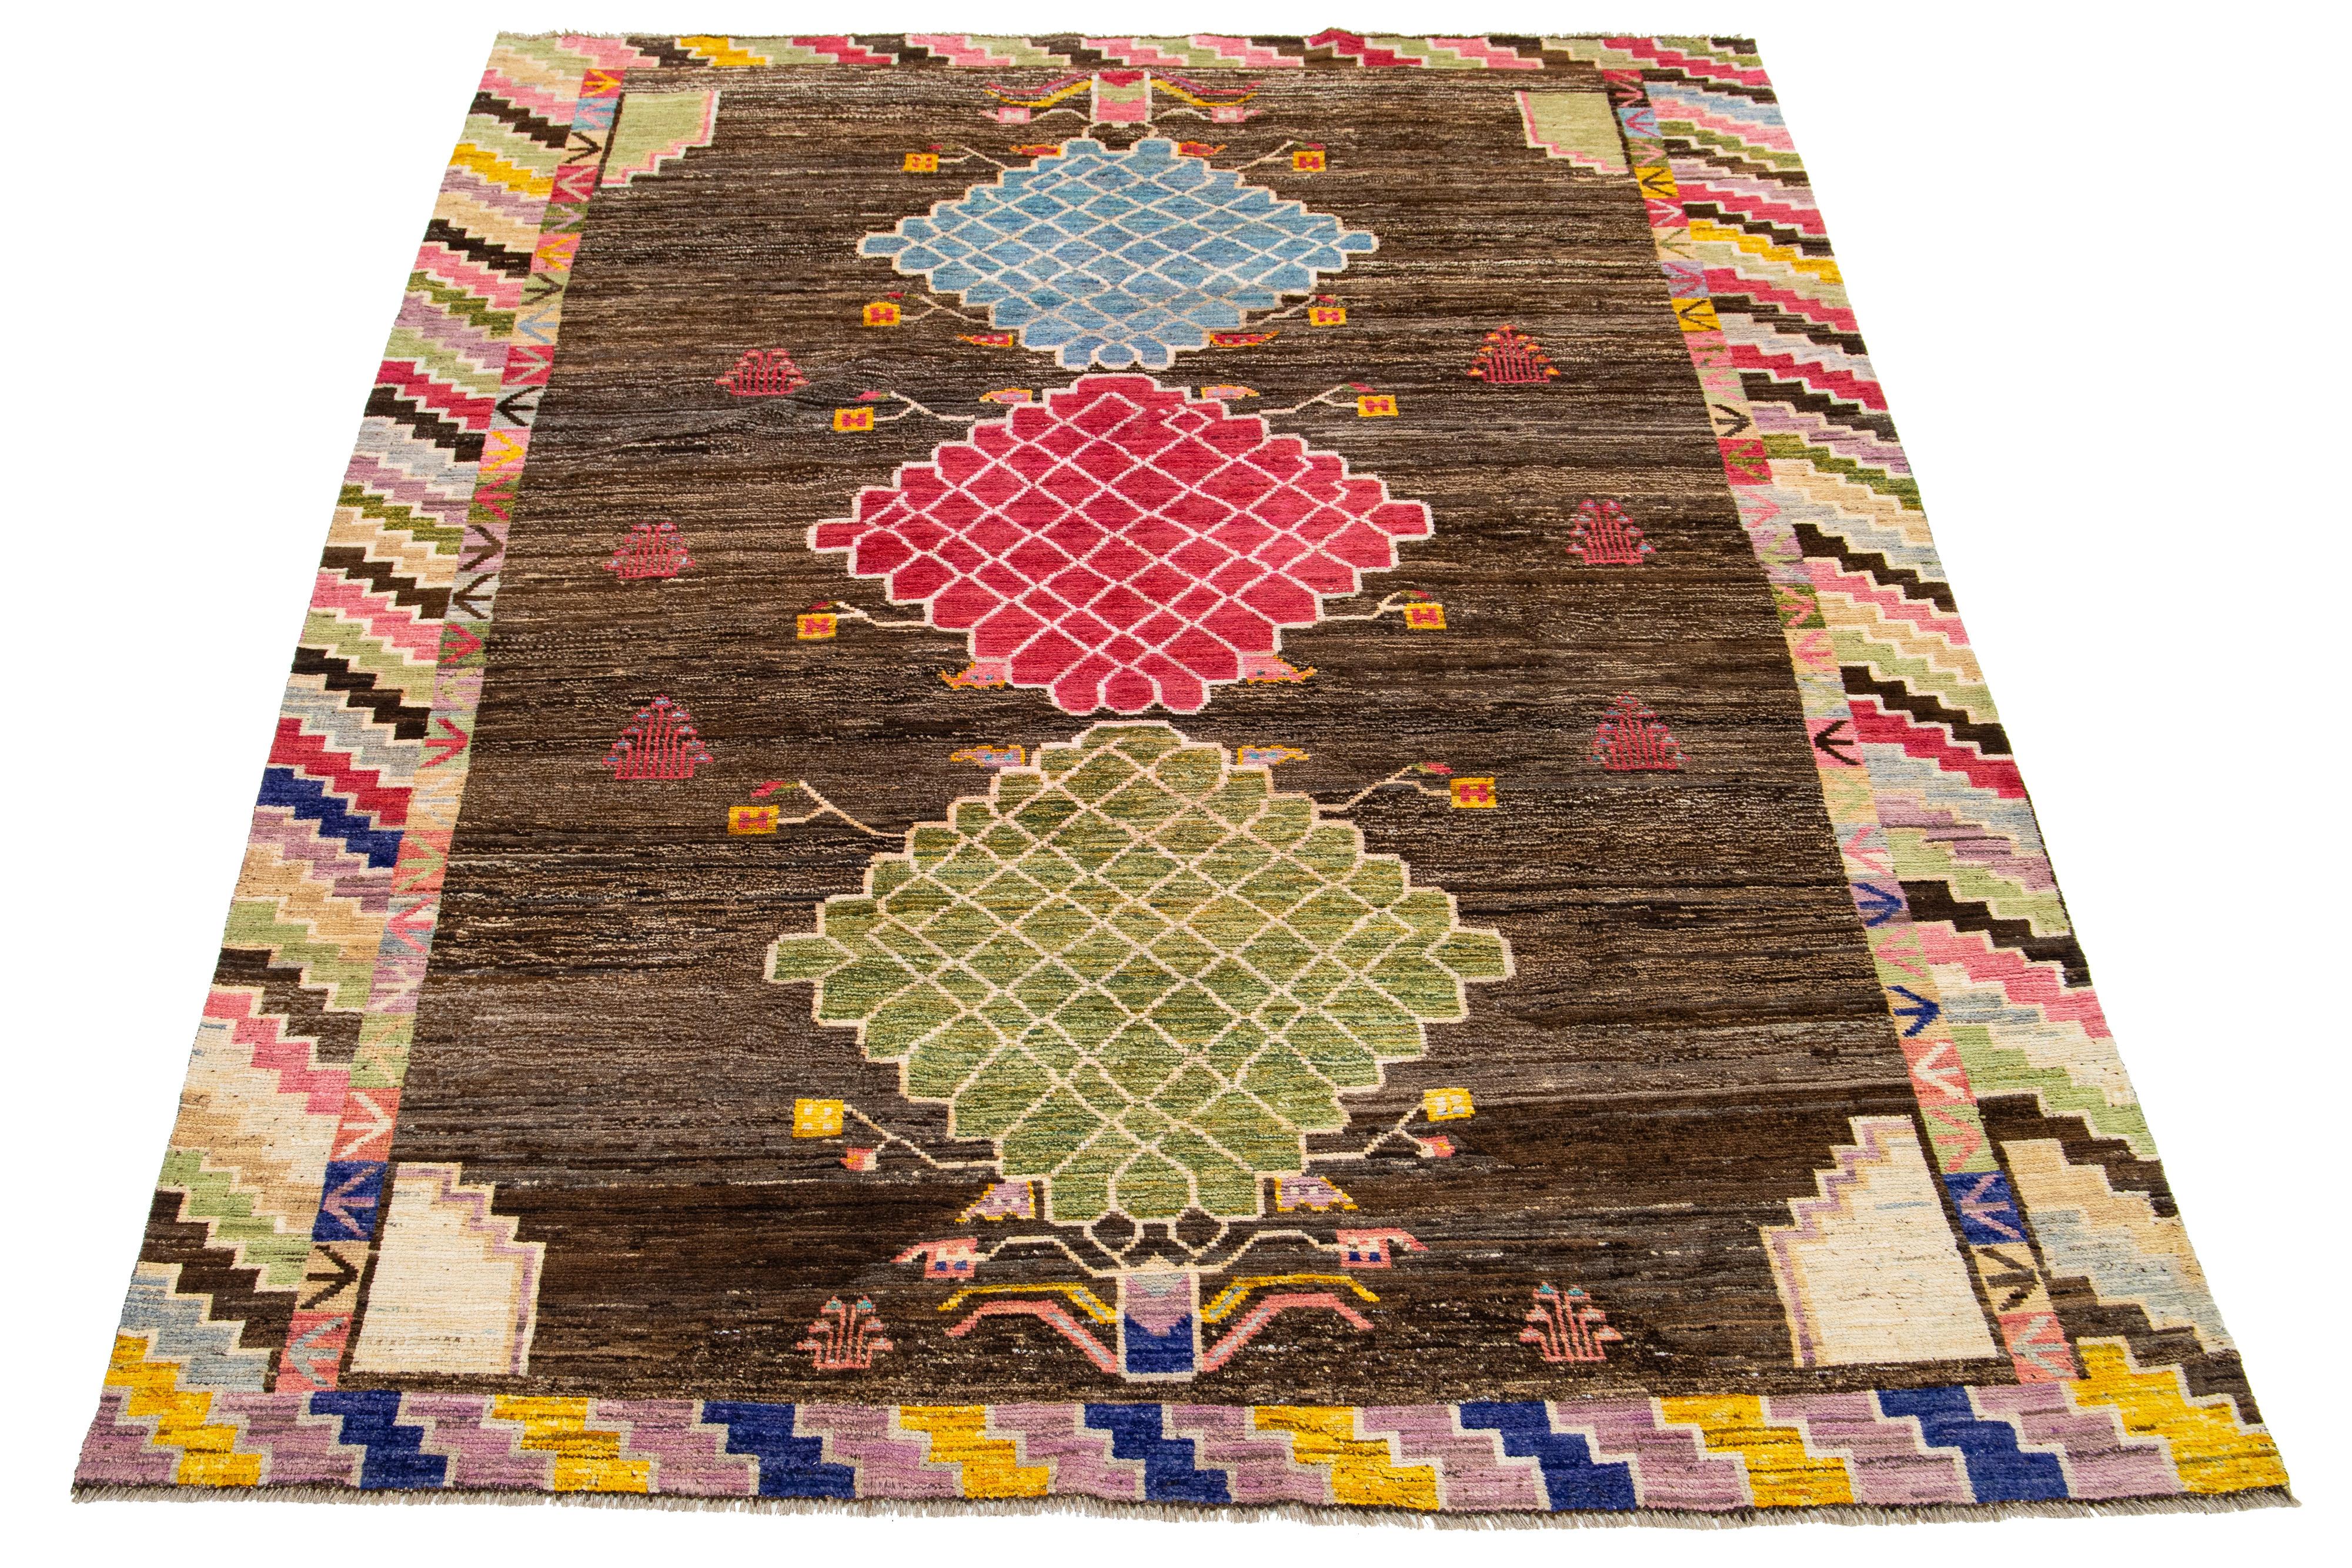 This wool rug showcases a modern take on the Moroccan style, boasting a striking blue and brown color field. It features a captivating all-over pattern in many colors, adding vibrancy to any space.

This rug measures 6'11